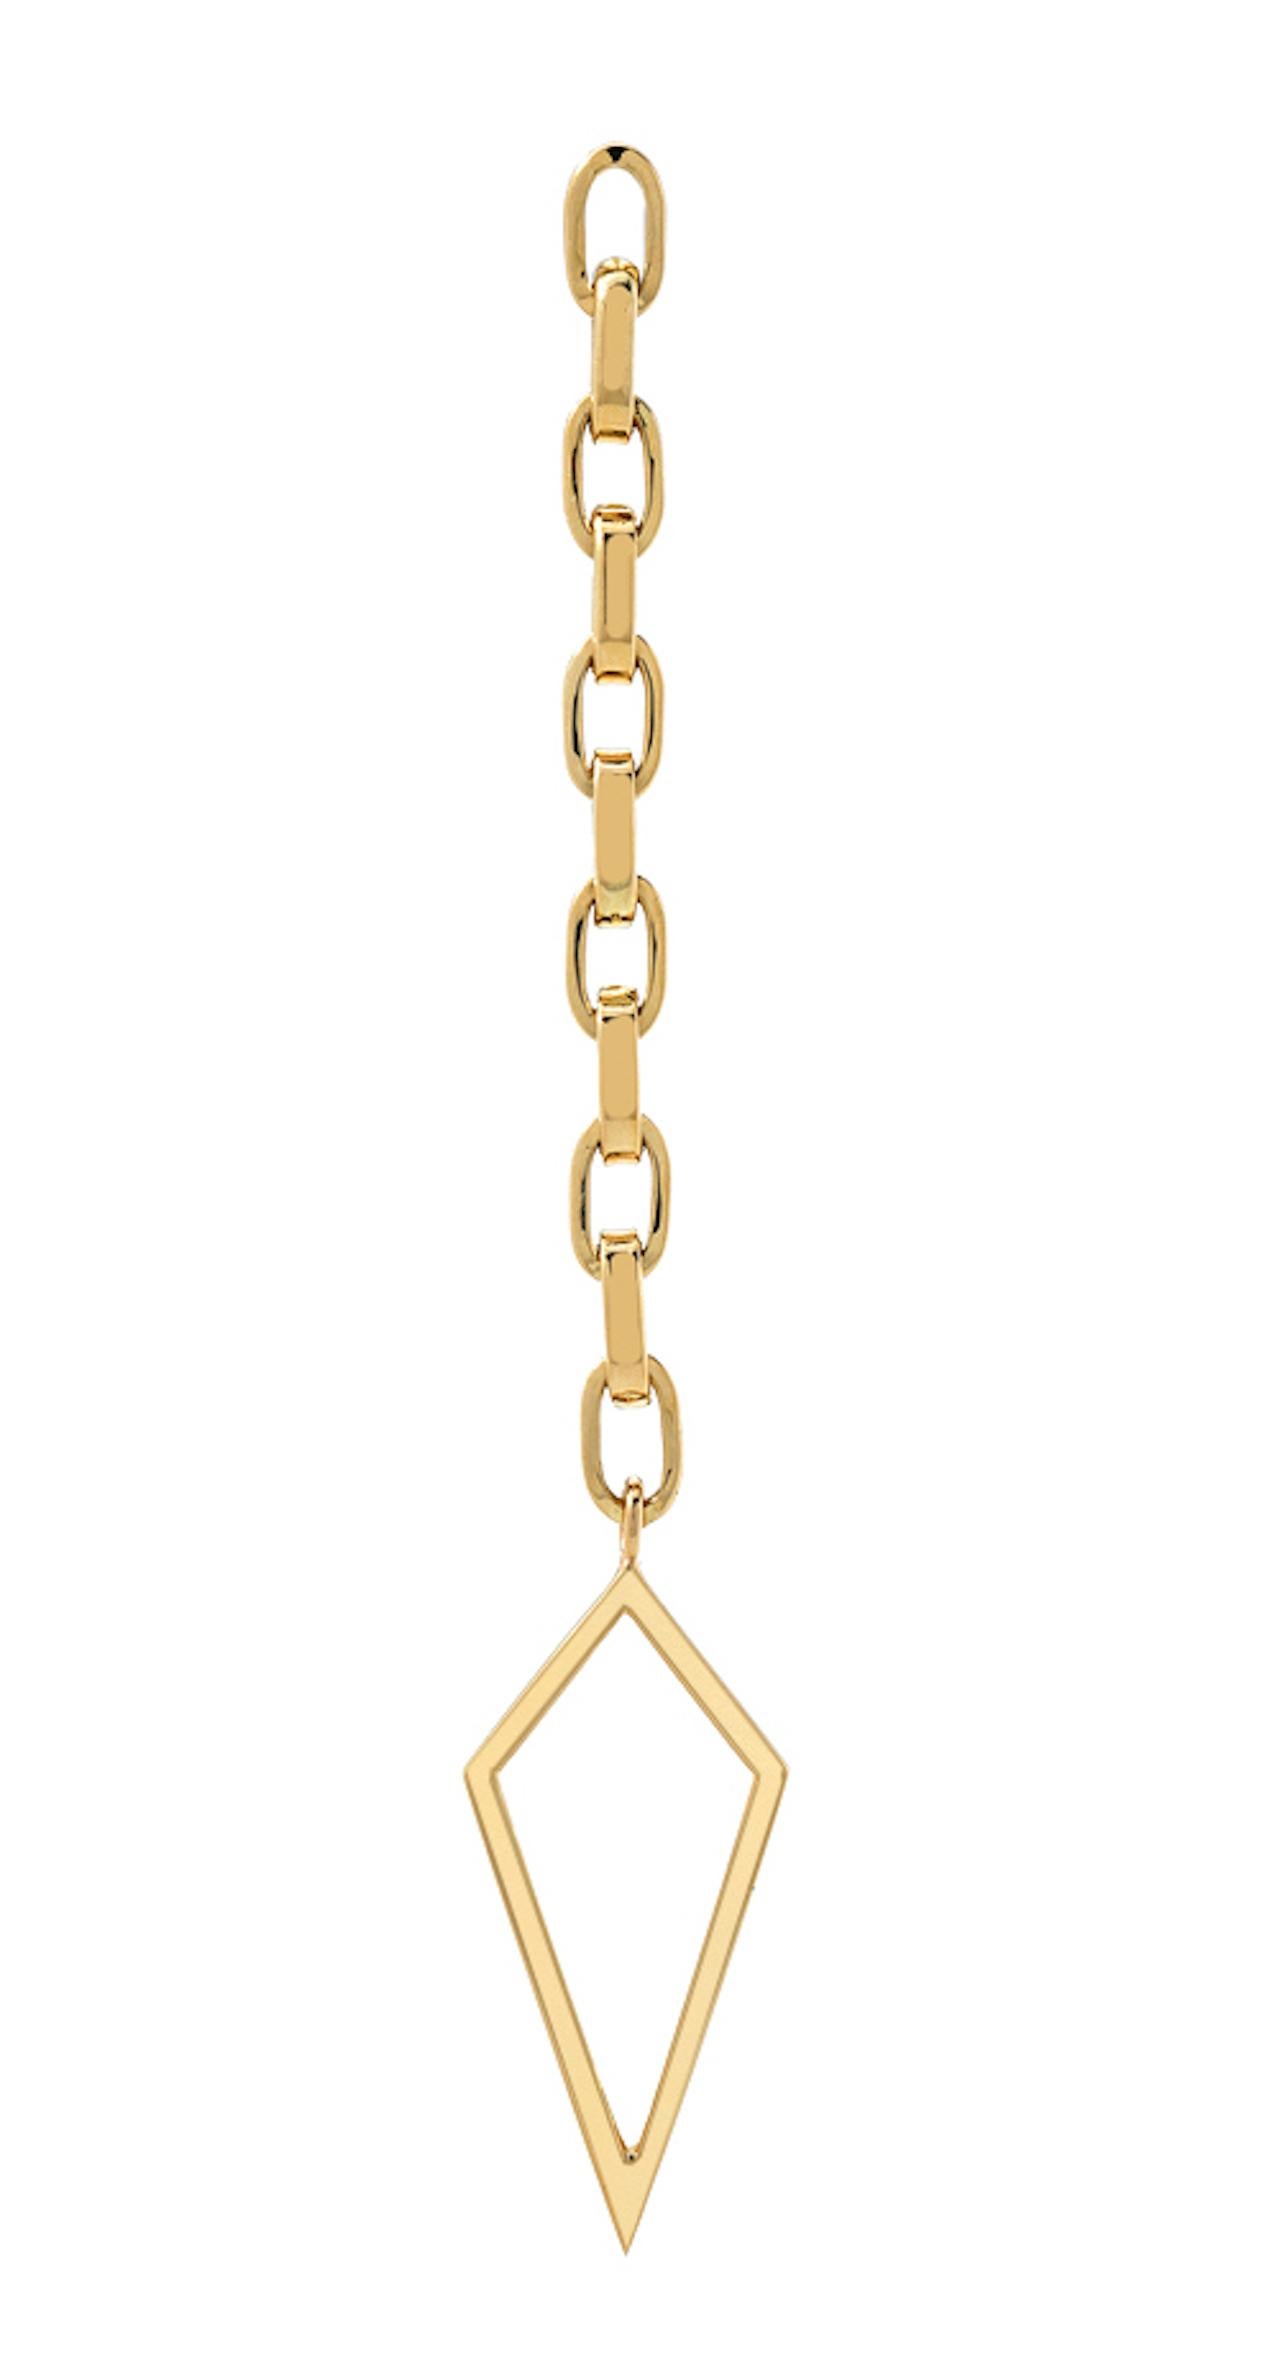 The 14k yellow gold Baby Amulet Earrings are a new classic. Each earring weighs in at only 4 grams, so they are surprisingly lightweight and easy to wear. They are 80mm long and the amulet is 13mm wide, making them a dramatic statement for day or